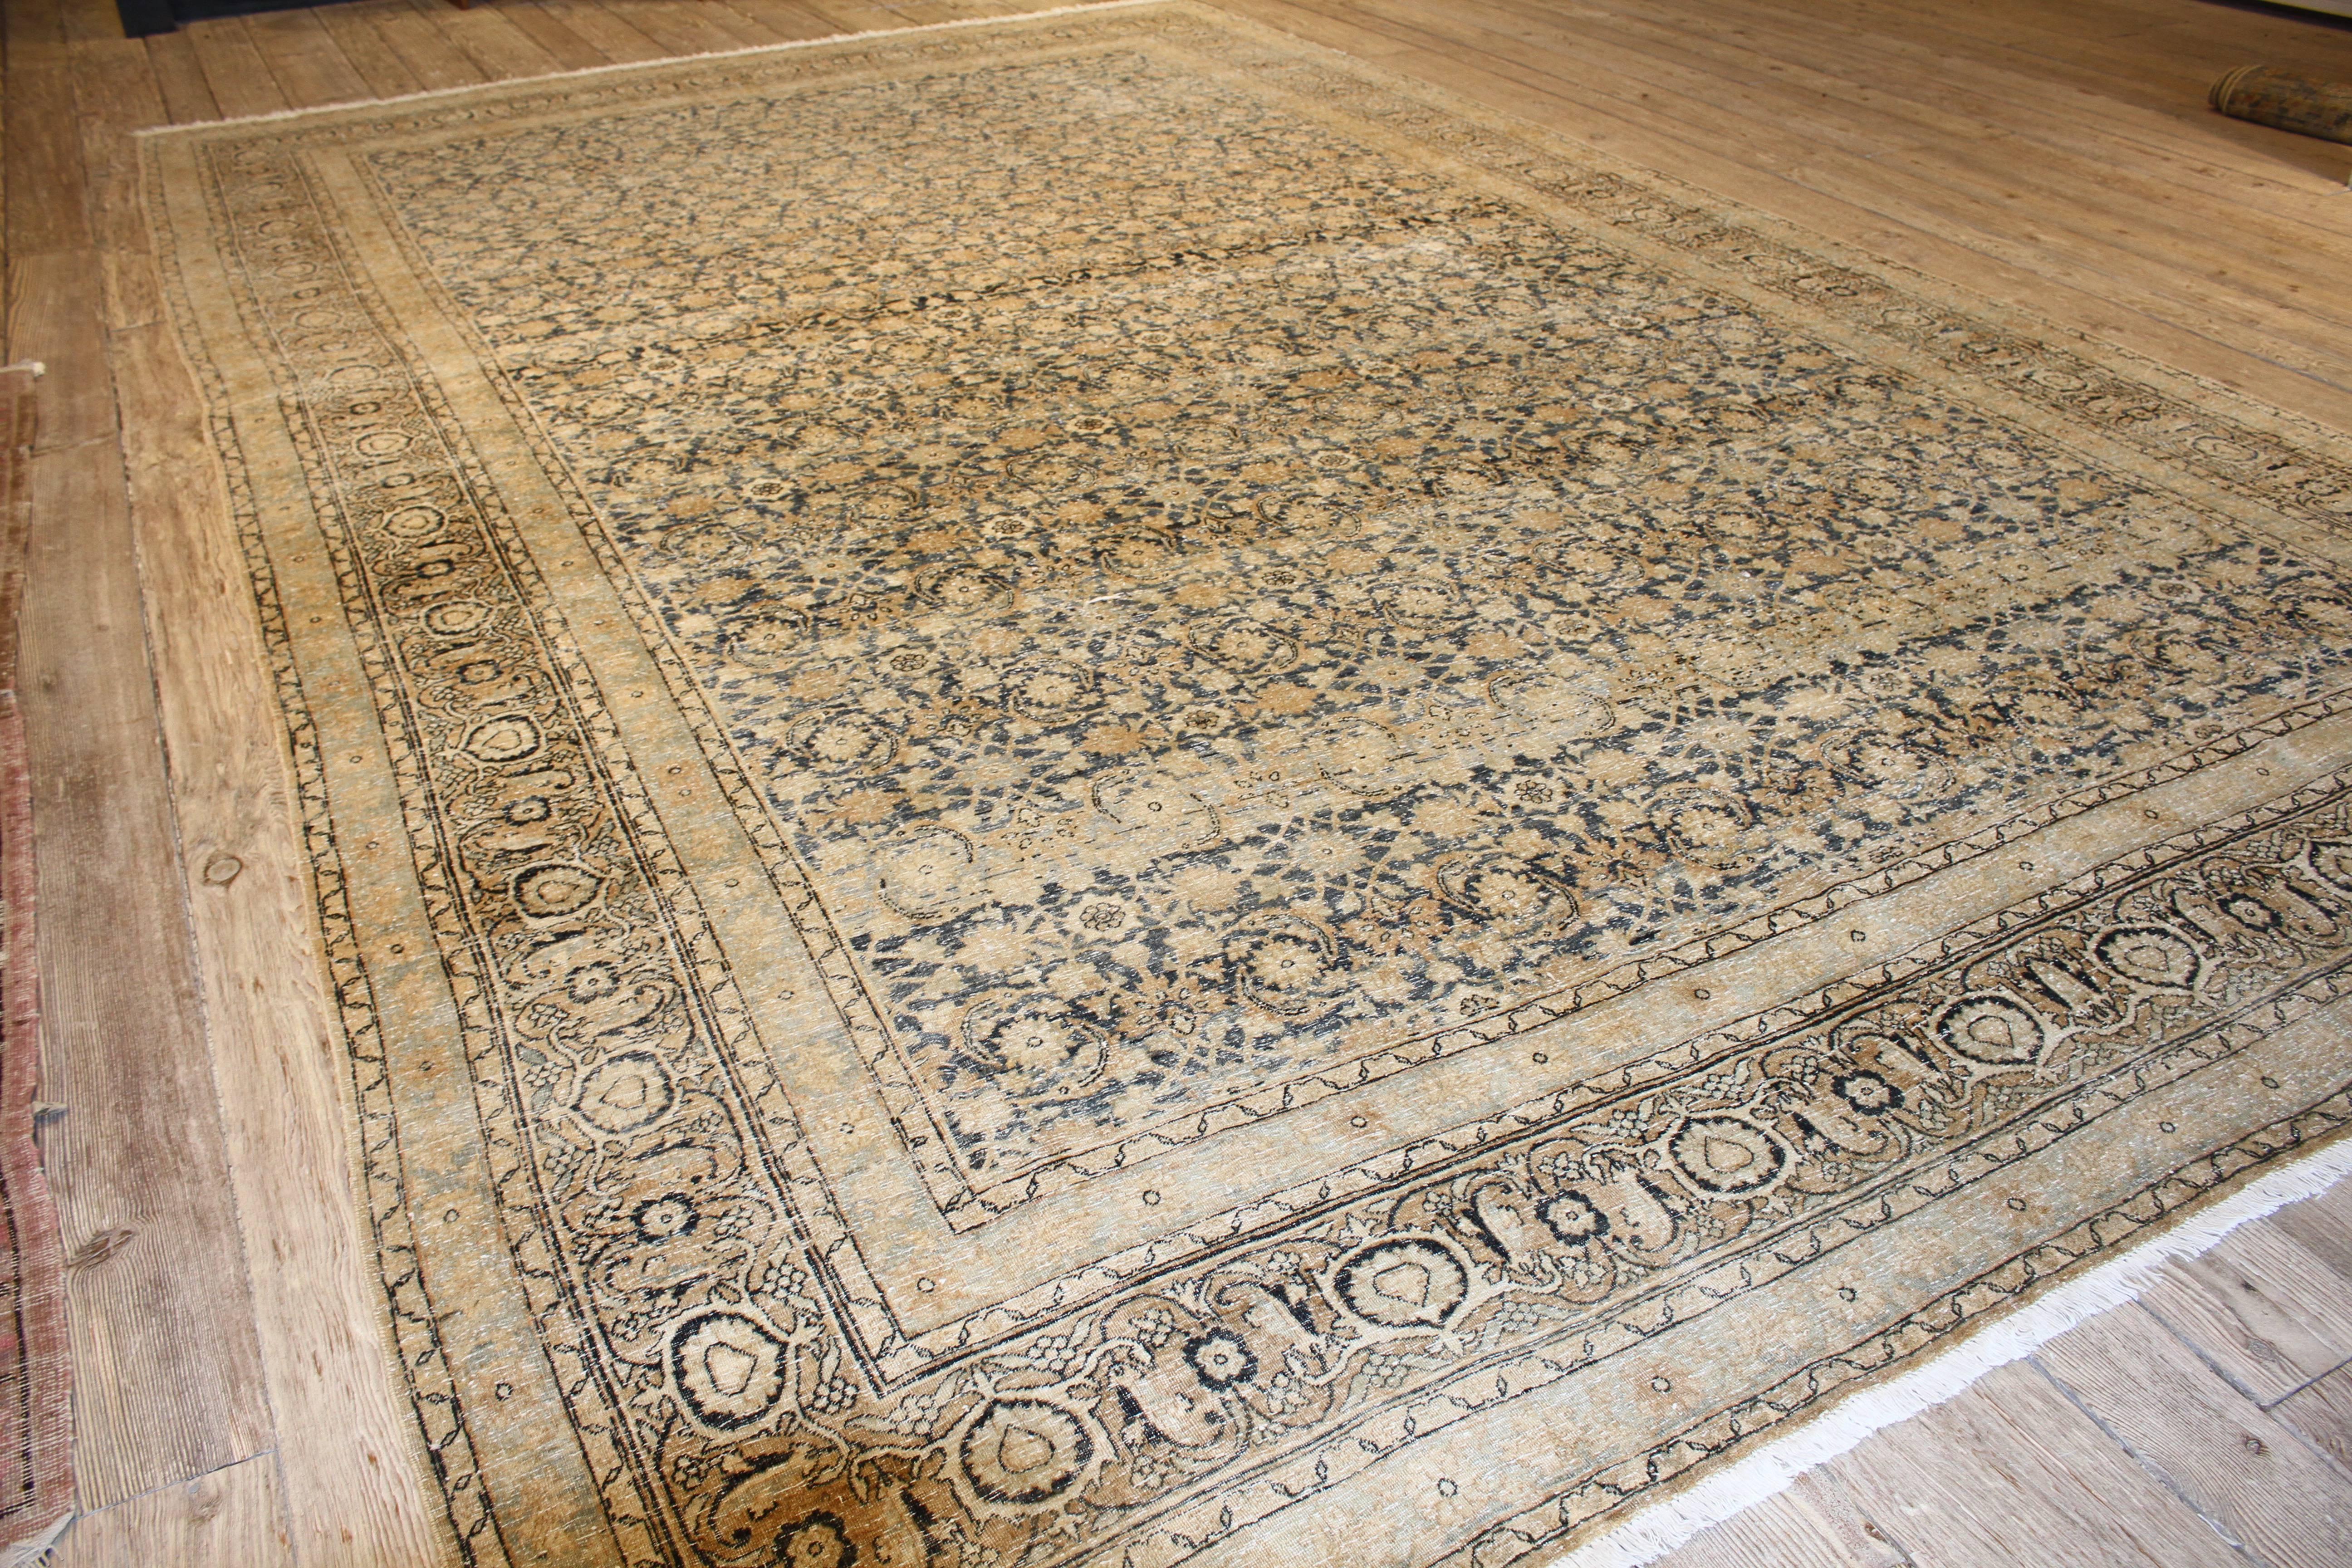 A breathtaking Yazd rug with the Herati design, a repeat pattern consisting of a flower centered inside a diamond with curling leaves positioned parallel to each side.